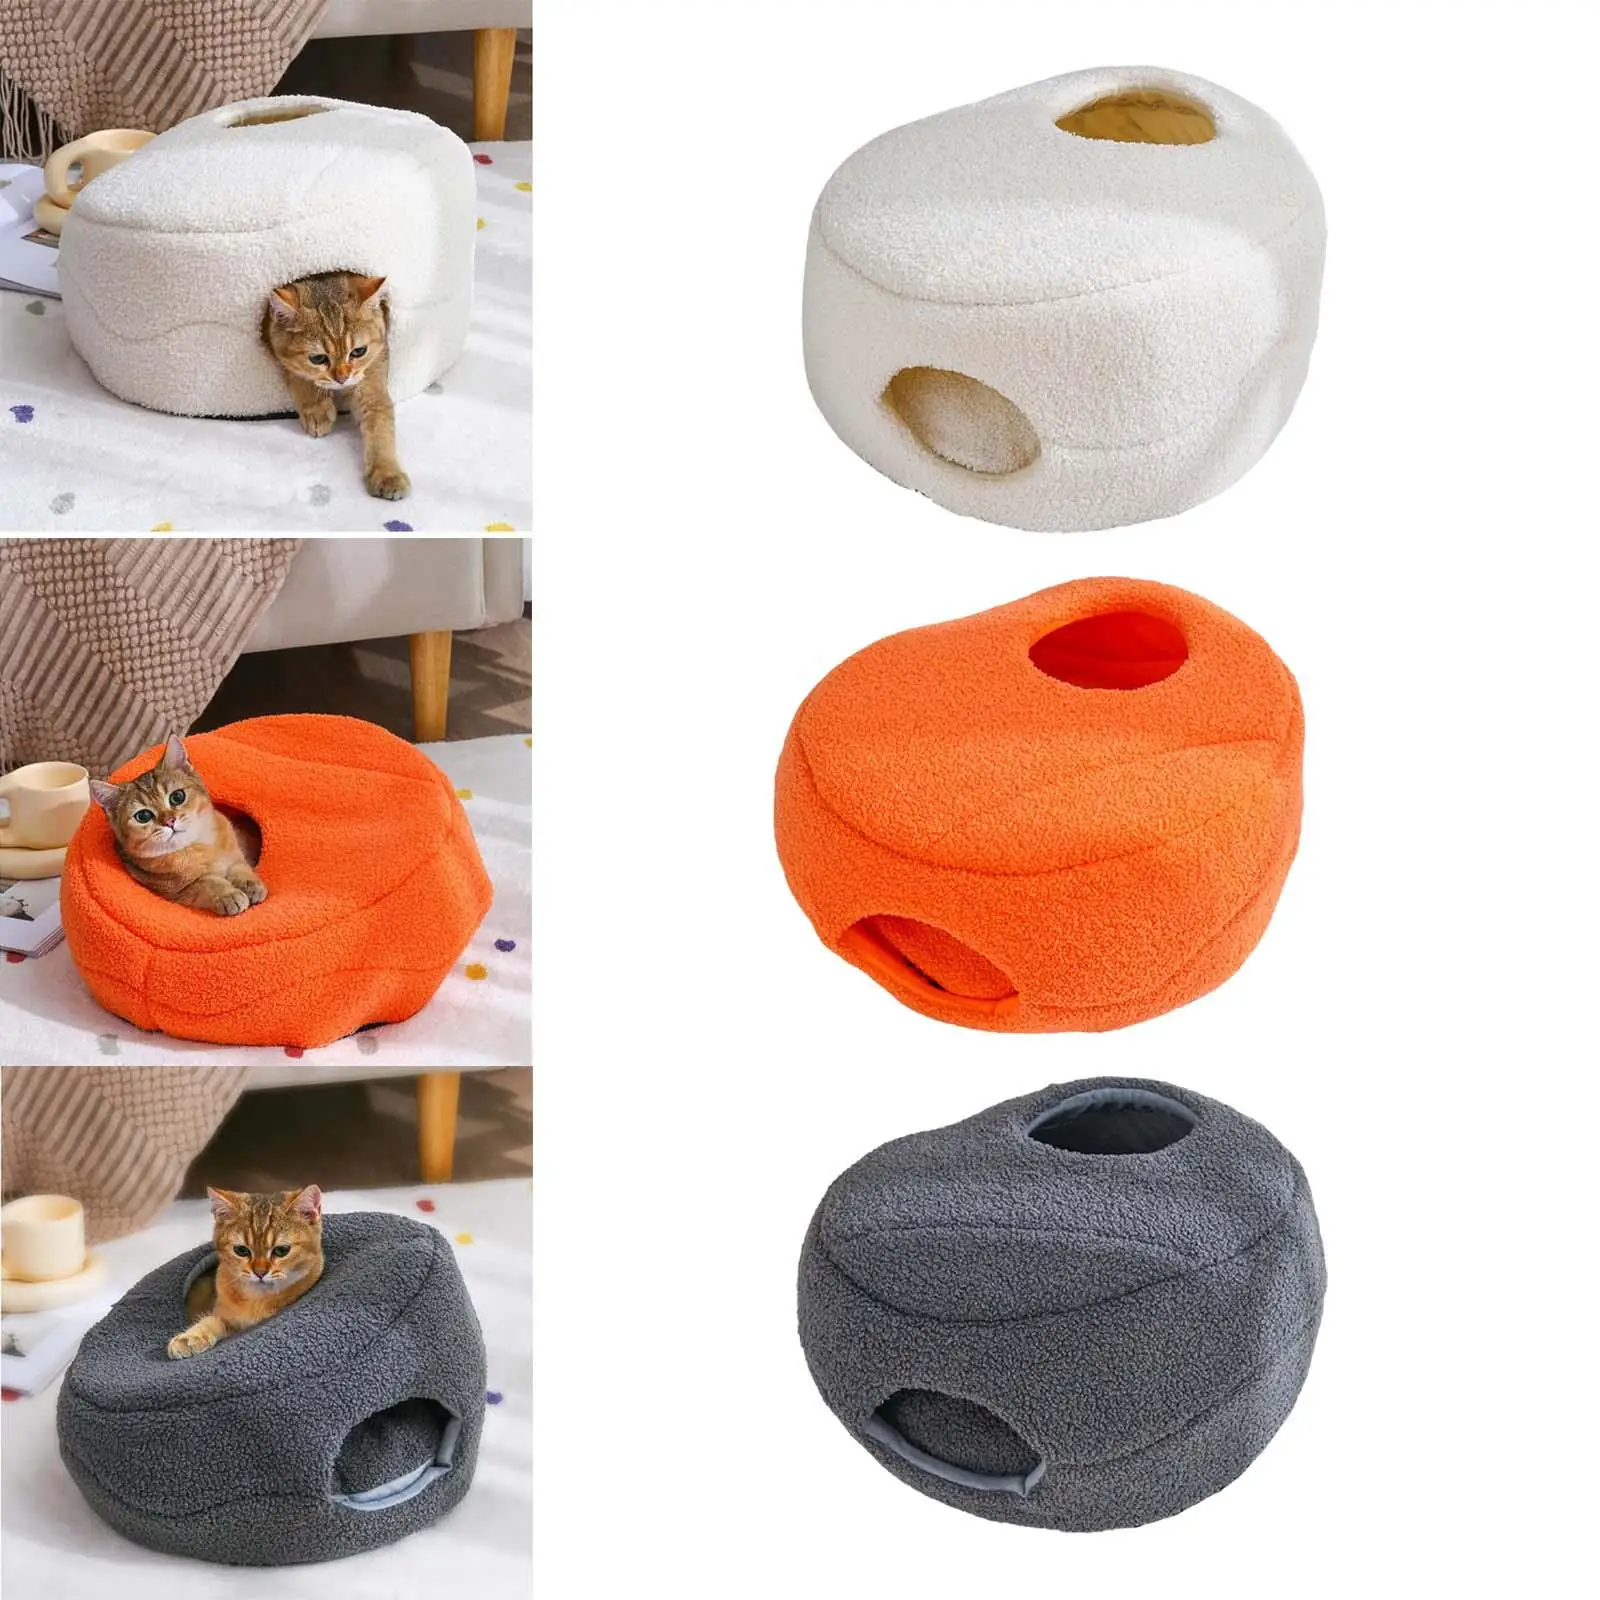 Cozy Puppy Kitten House Warm Nest Washable Removable Cushion Winter Habitats Sleeping Pad Bed Cave Bed for Dog Cats Puppy